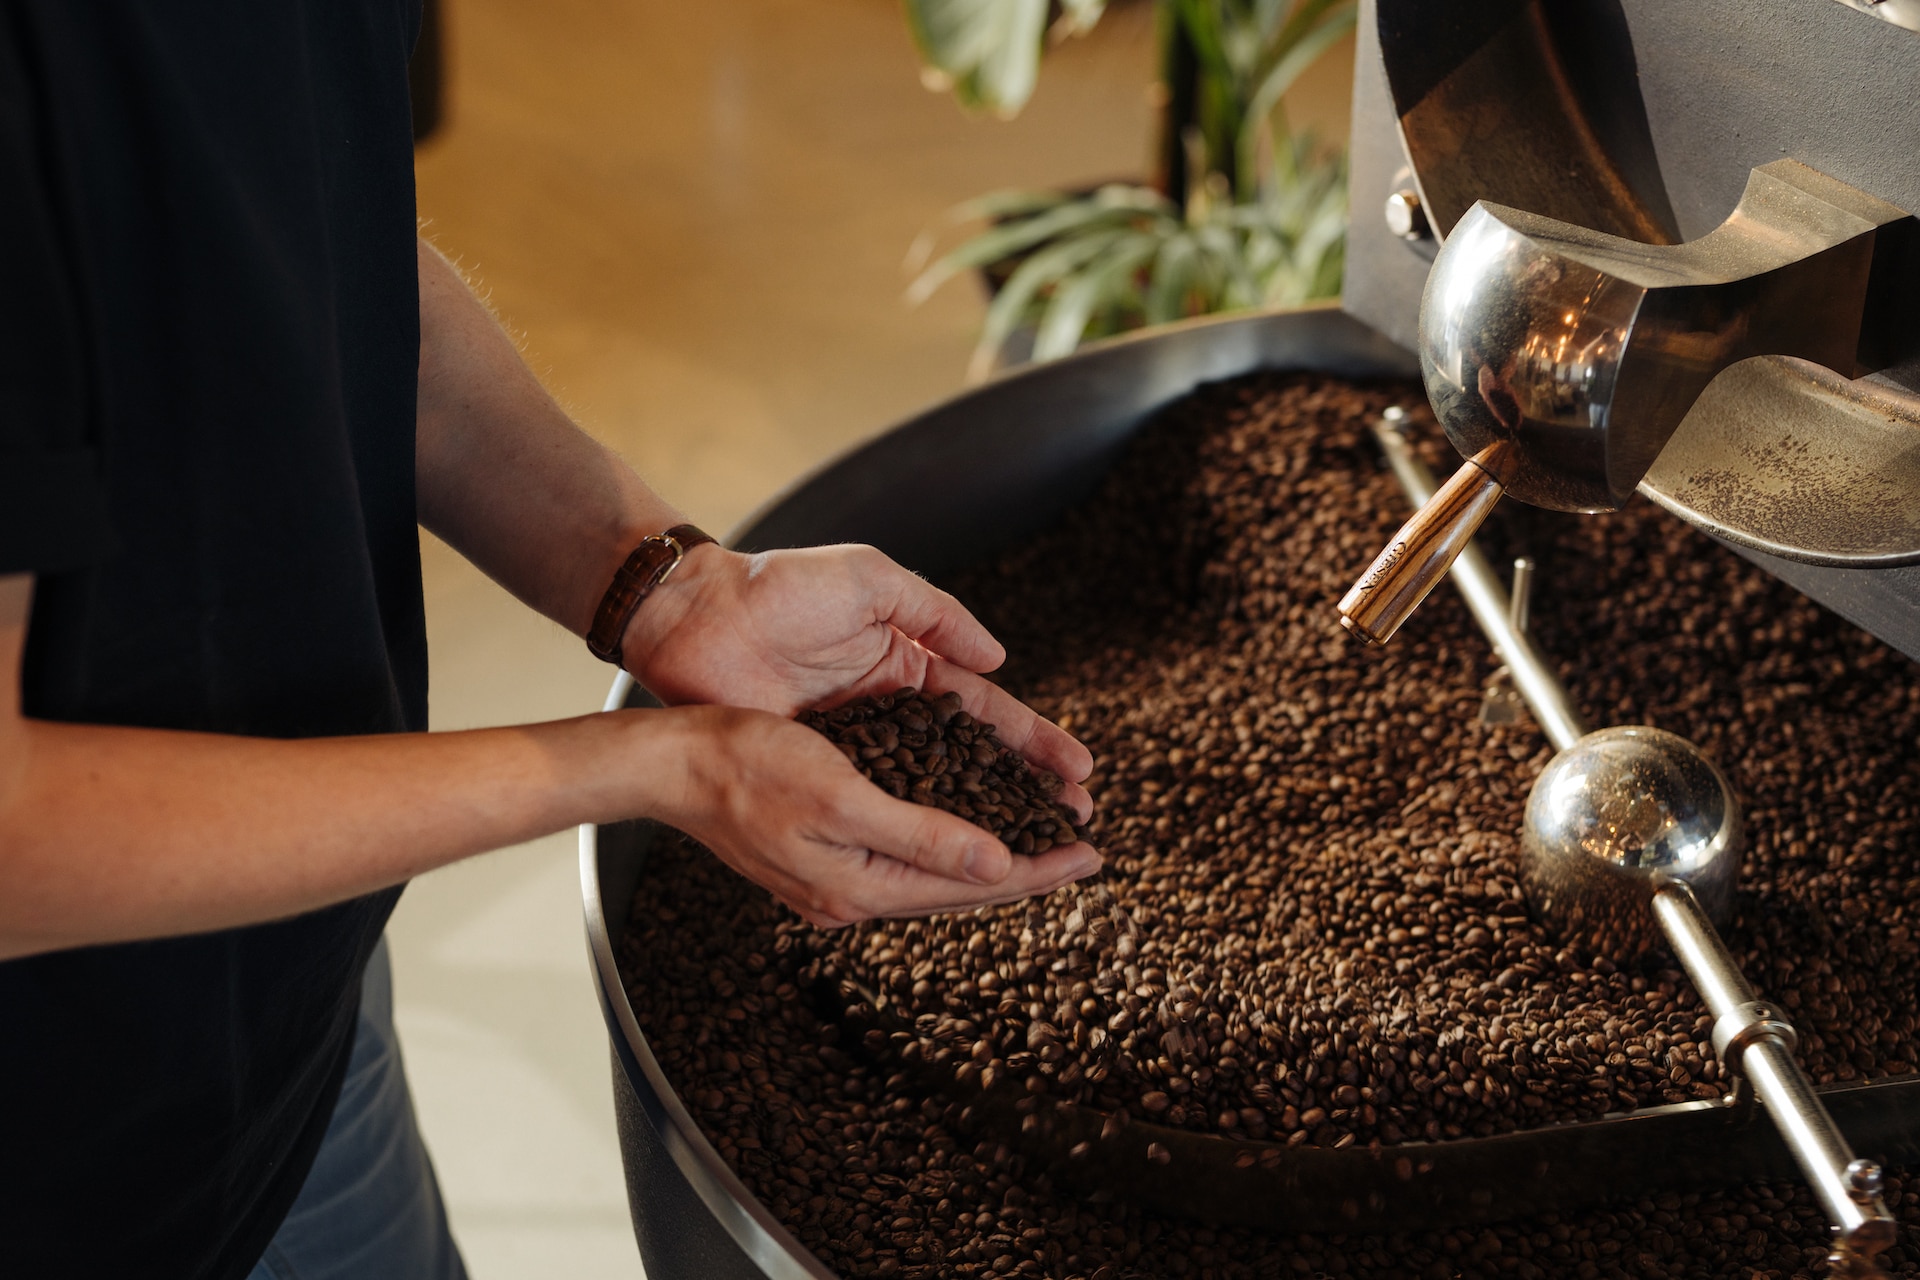 Hands touching coffee beans